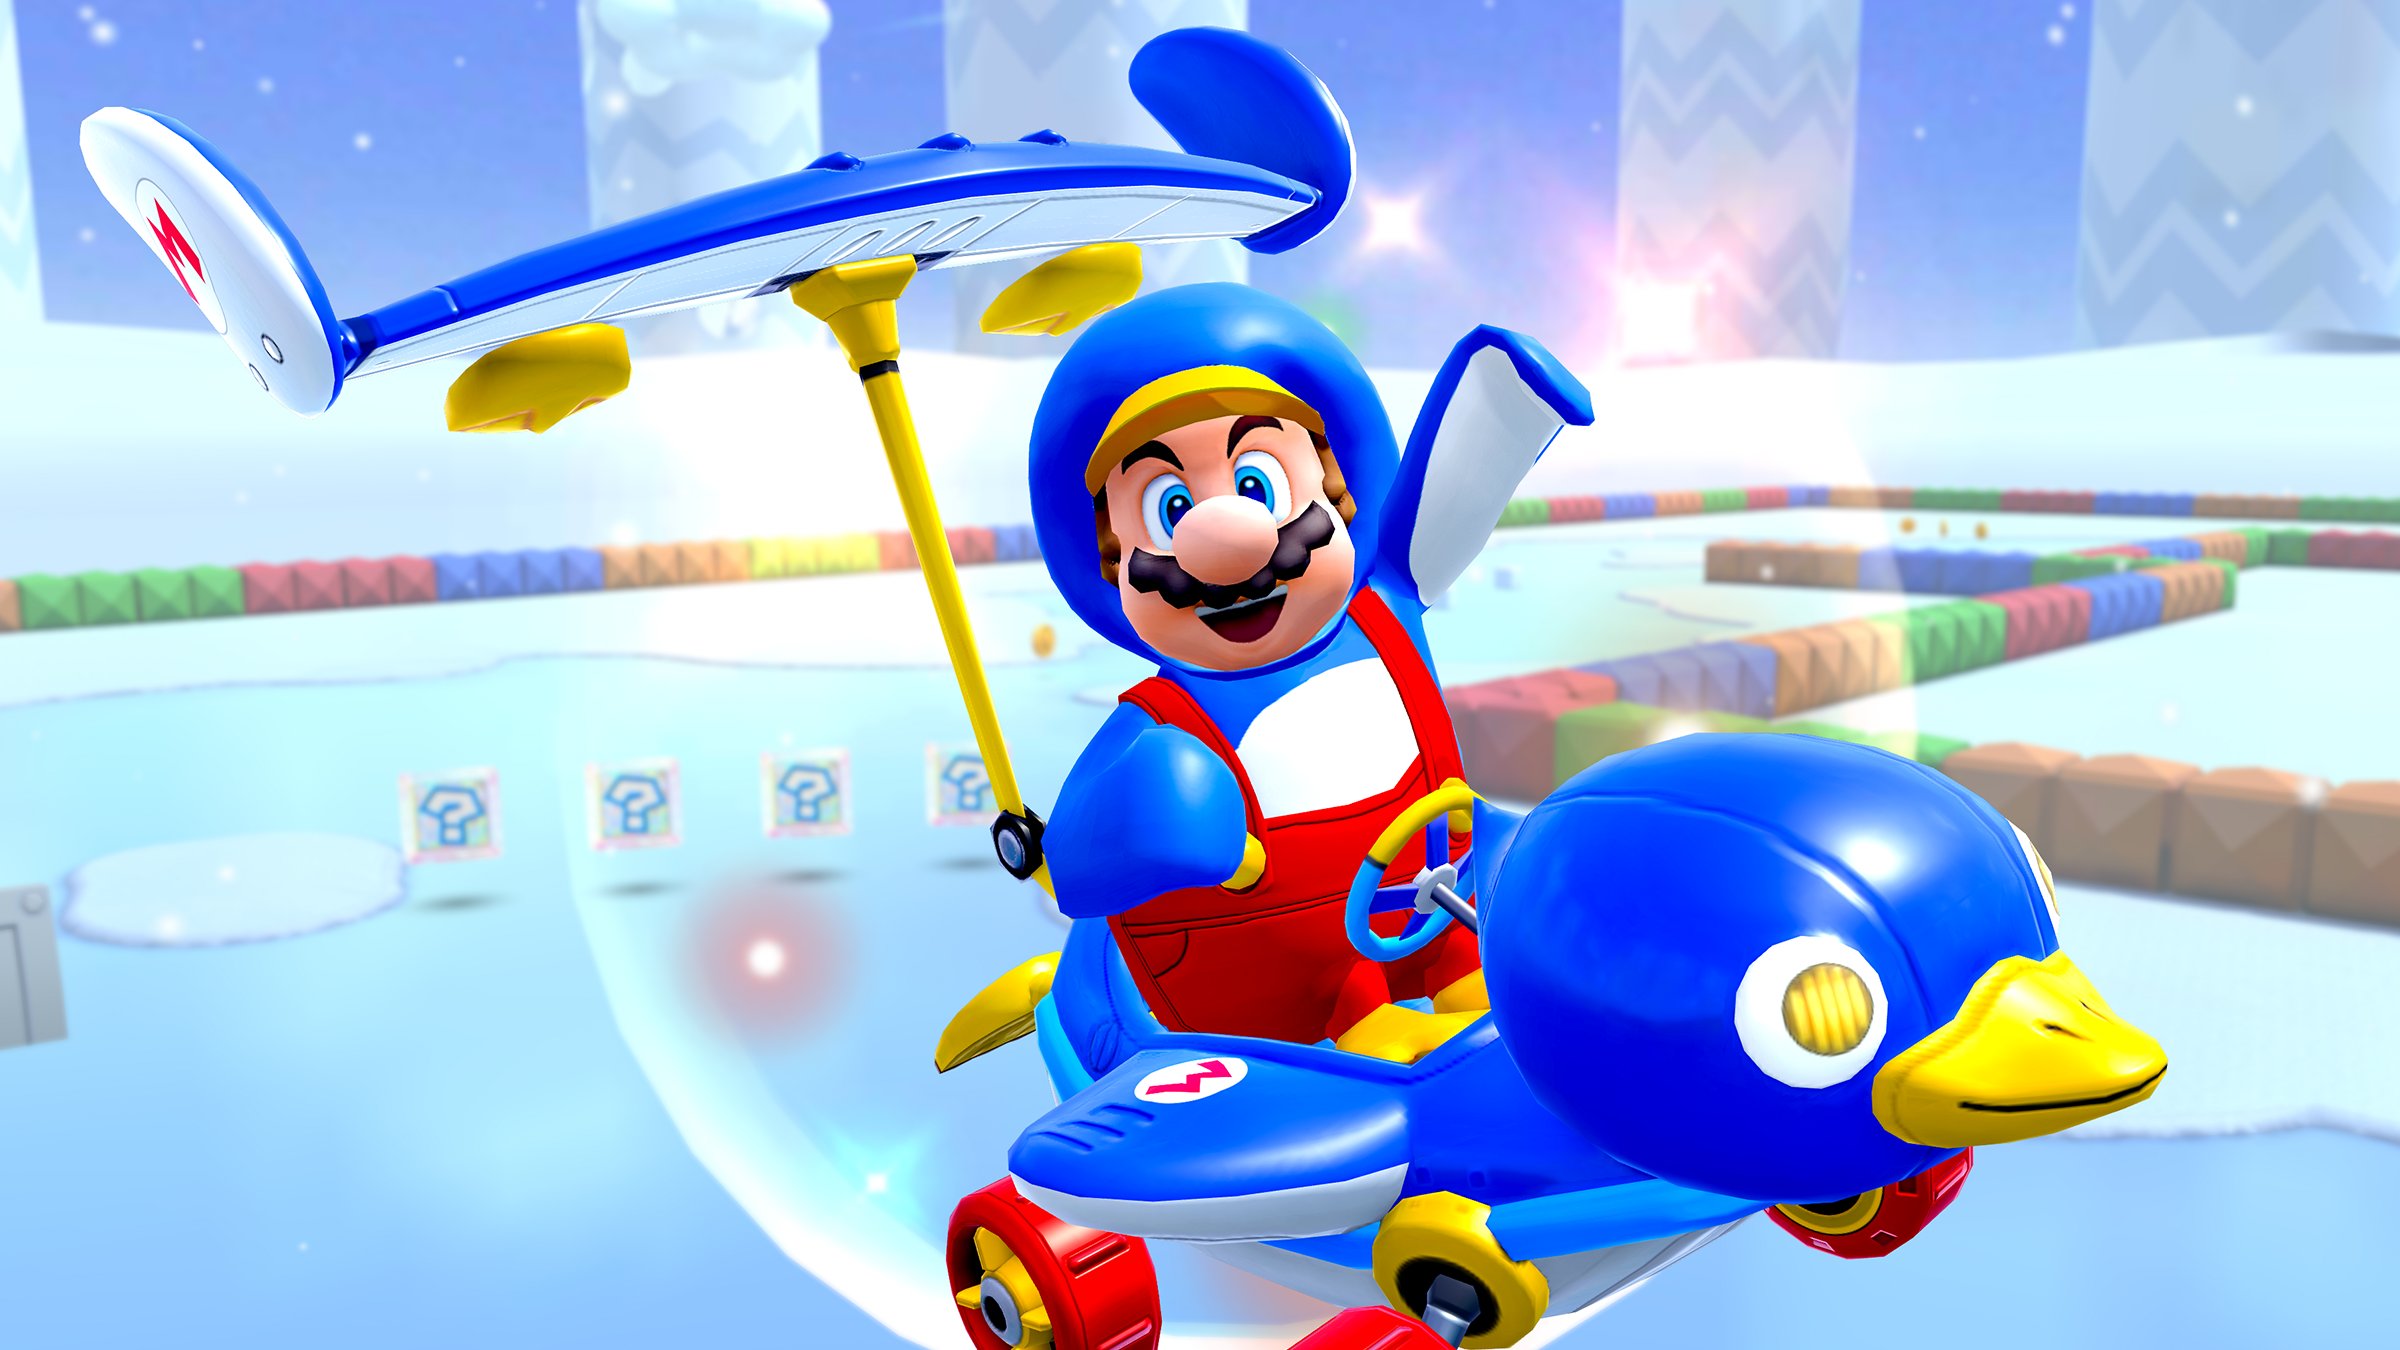 Soapbox: Why Penguins Should Be in Mario Kart (And Why It Makes Sense)